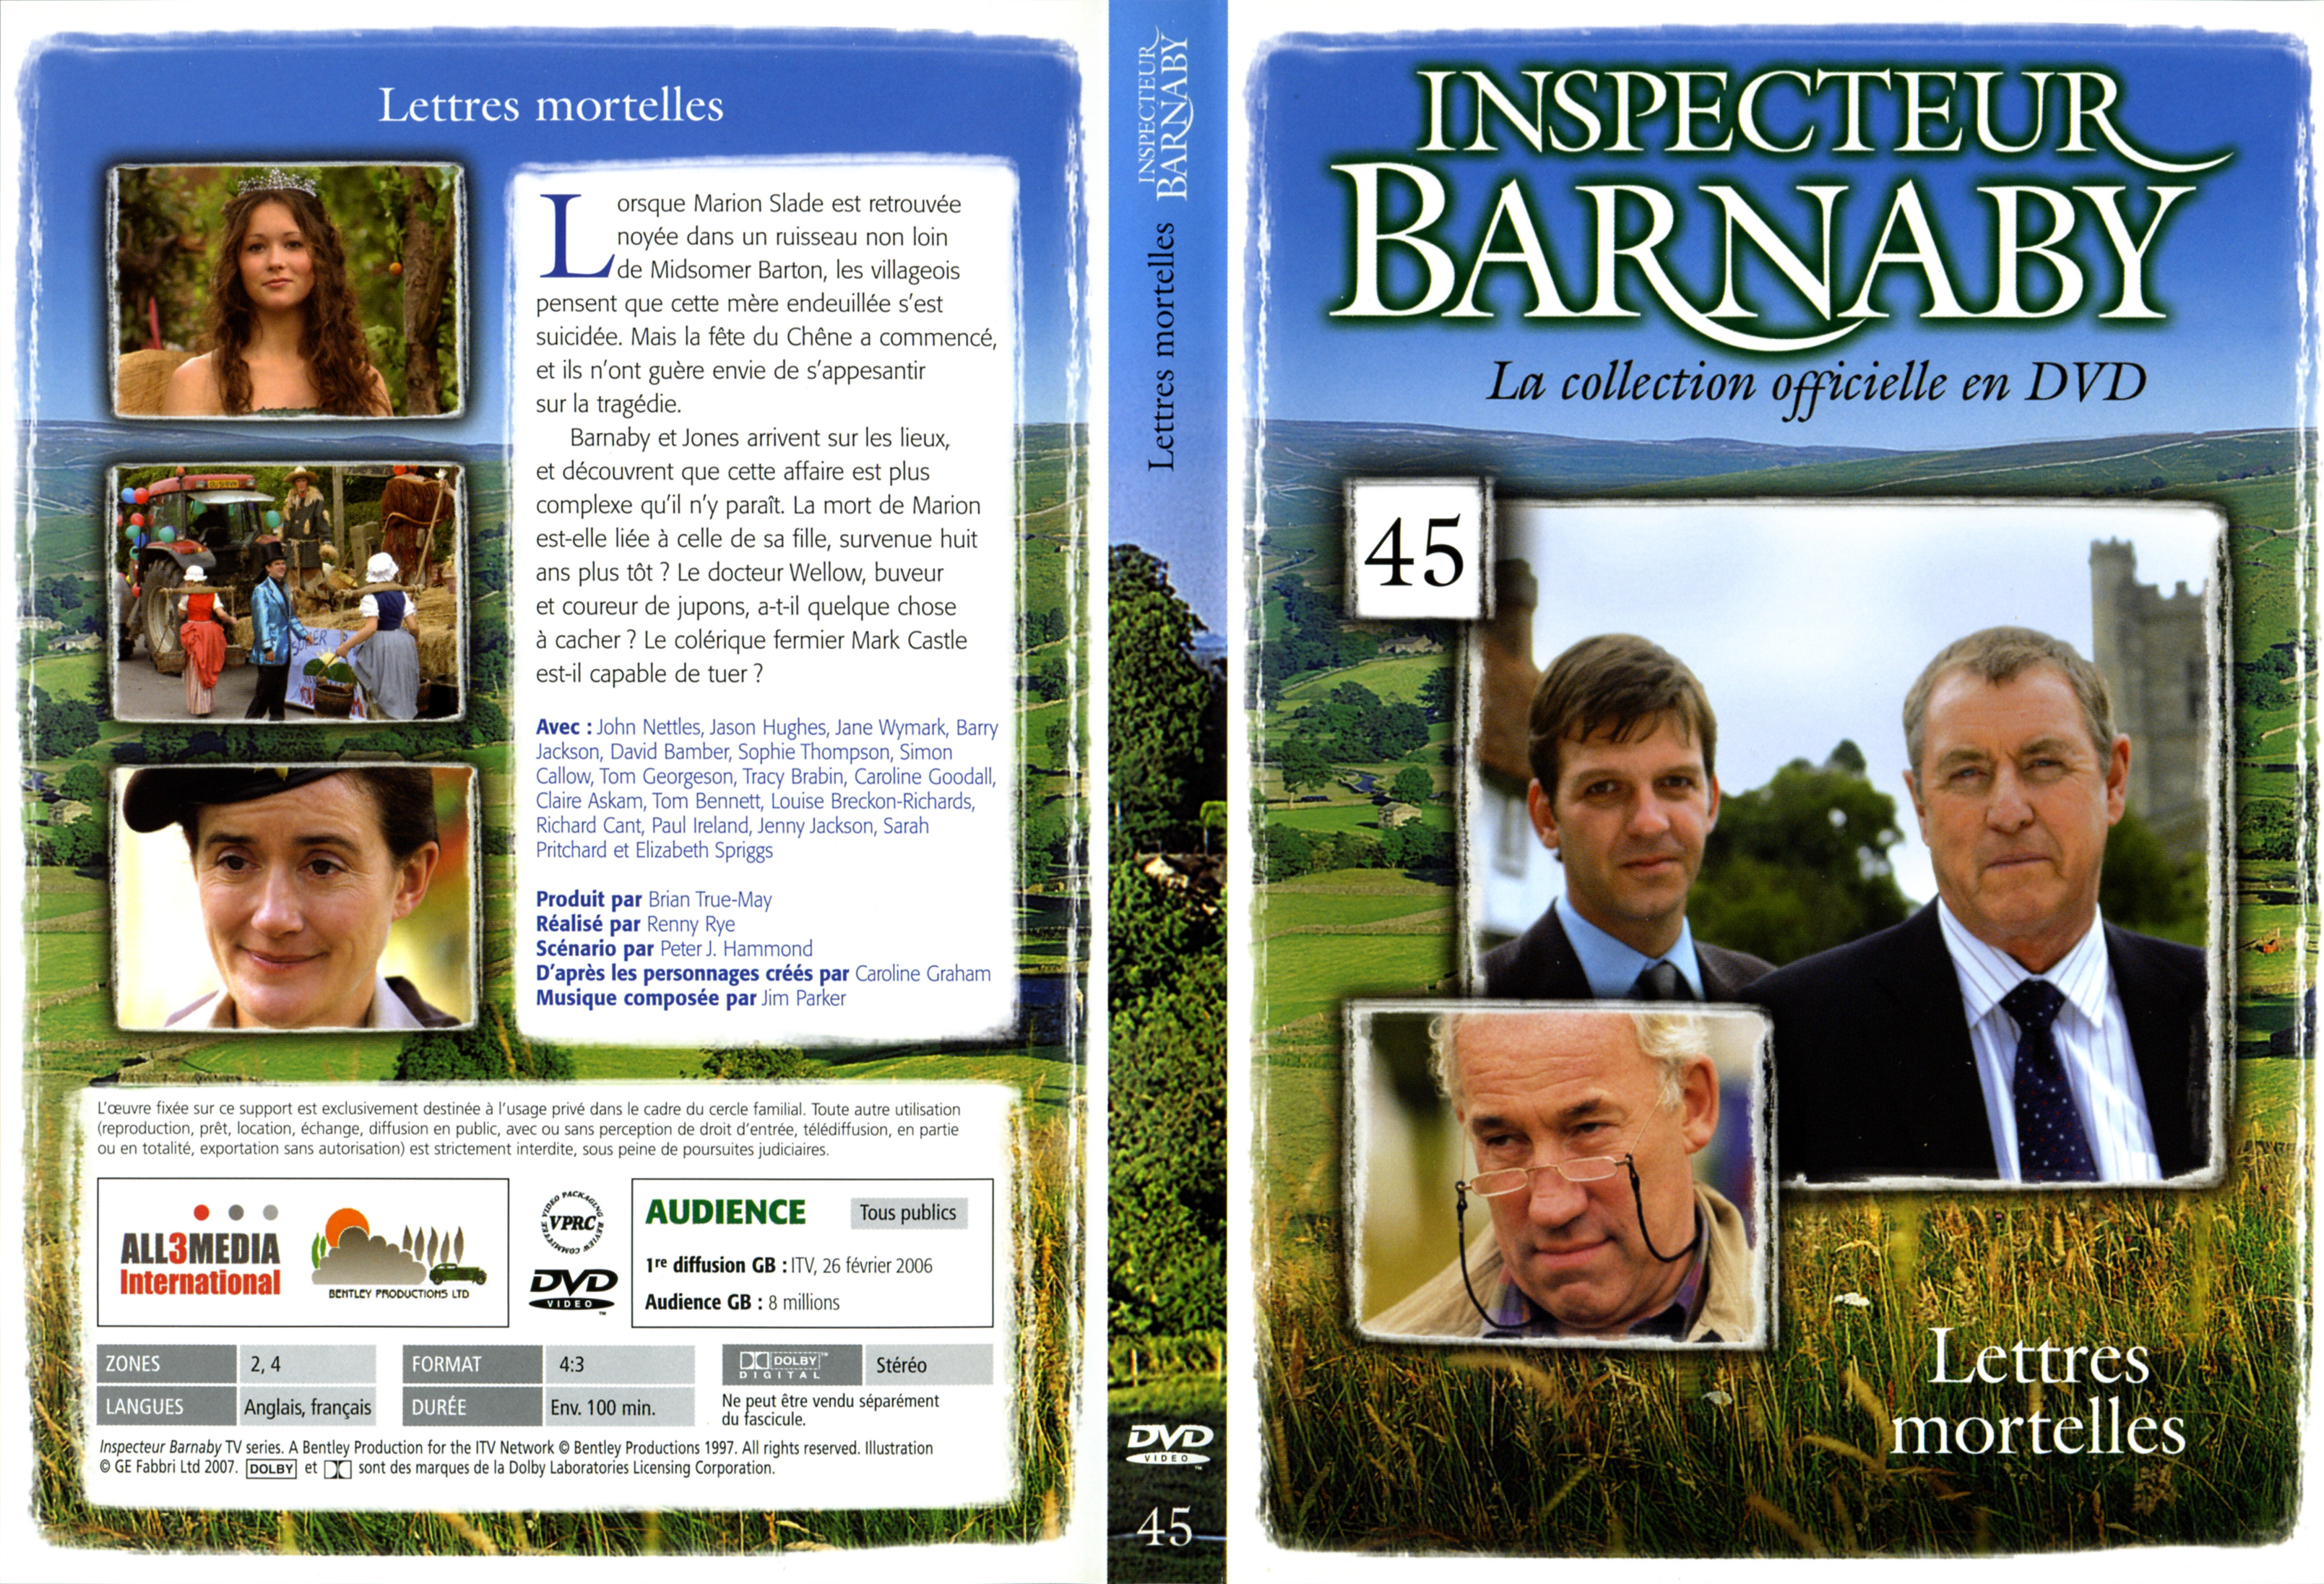 Jaquette DVD Barnaby vol 45 - Lettres mortelles